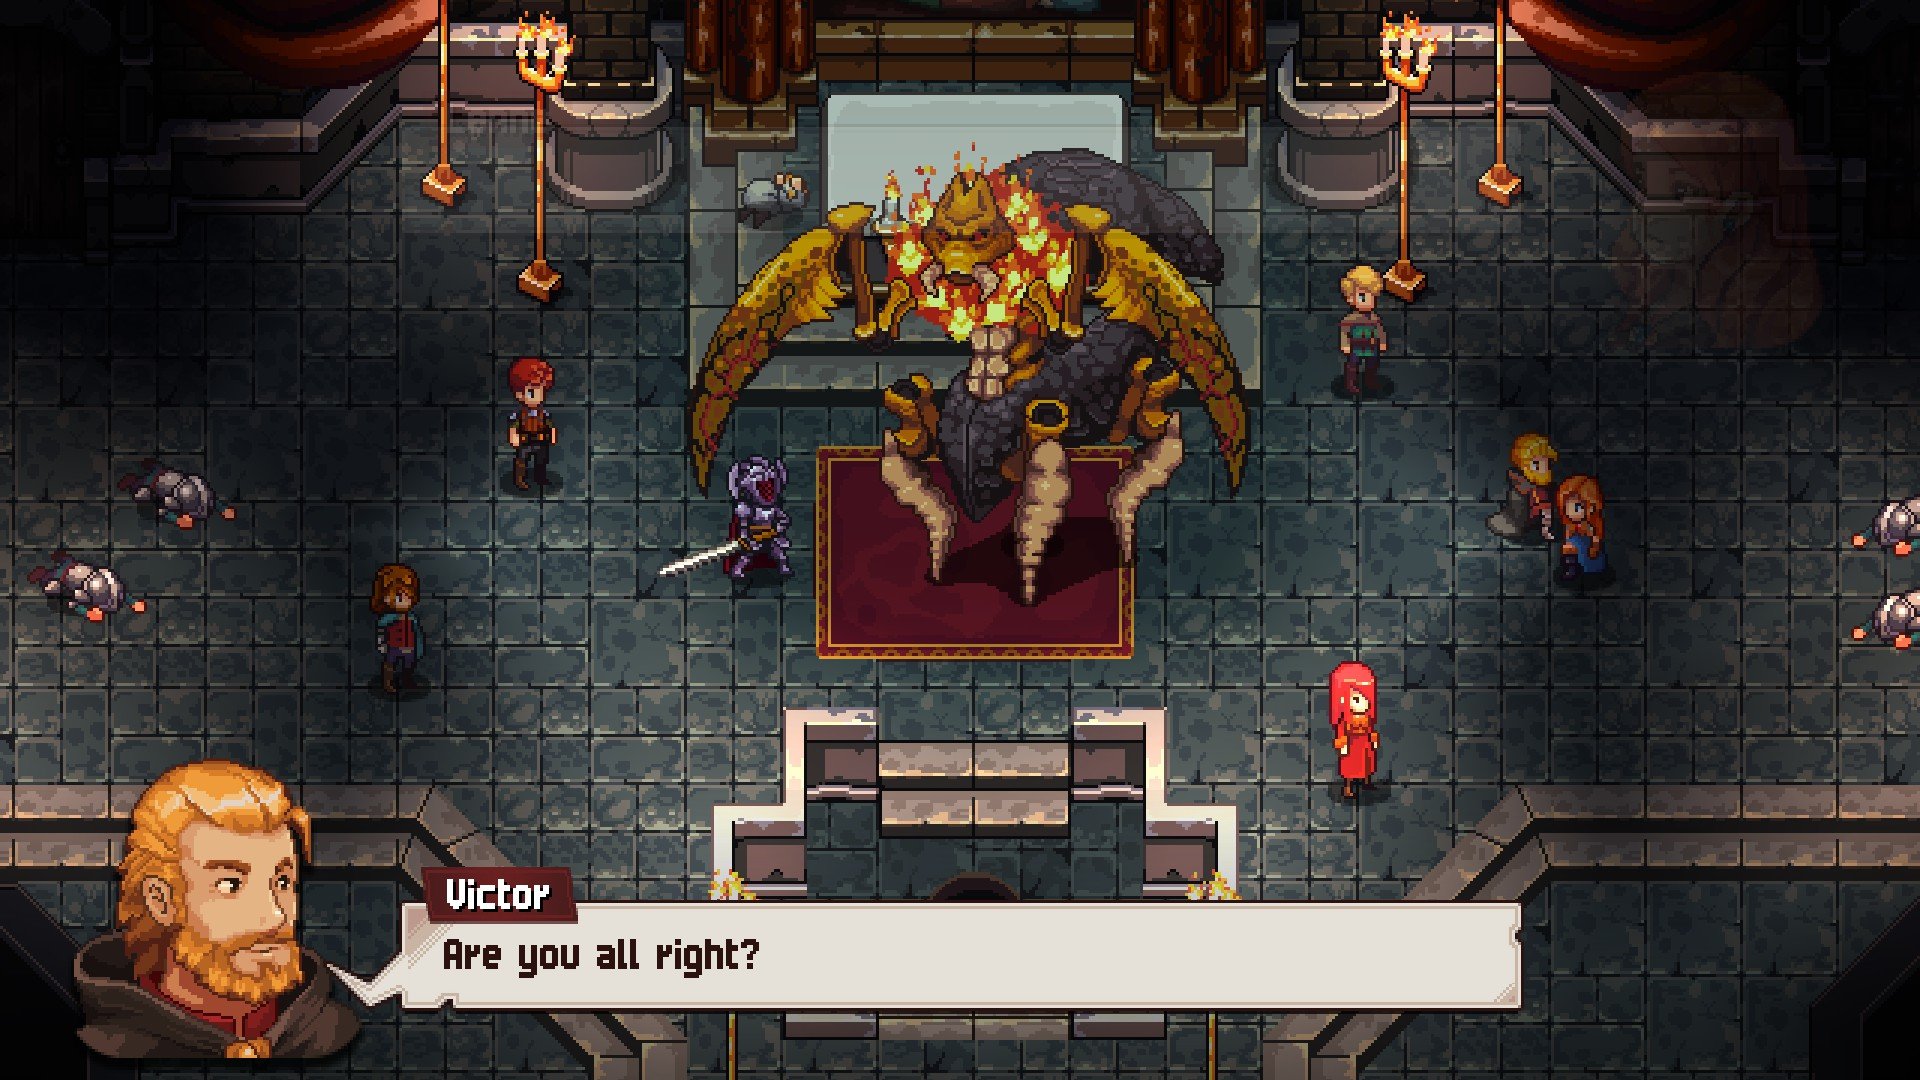 Chained Echoes - Chrono Trigger like 16bit JRPG releases Dec. 8th for PC,  PS4/5, Switch and Xbox (Gamepass). Please Be Good.